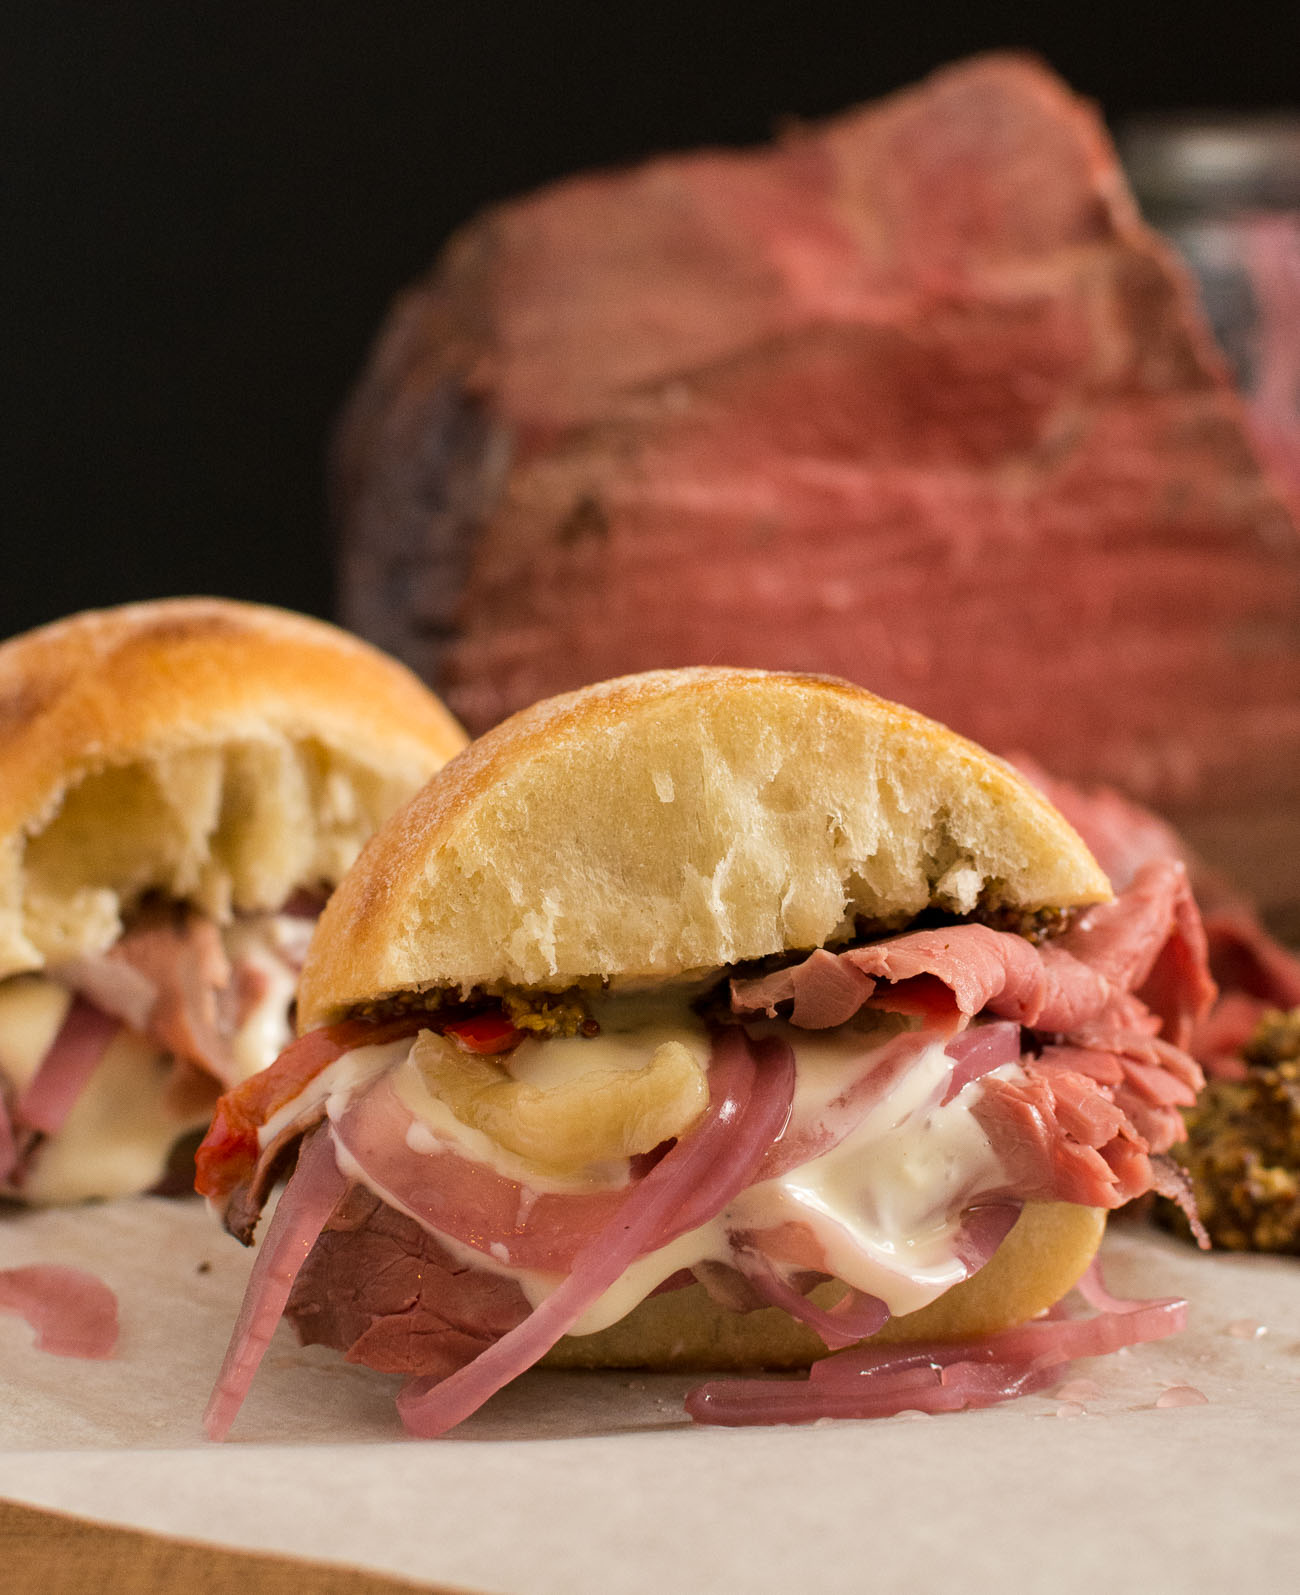 Make your roast beef sandwich beef from scratch. Cheaper, tastier and dead easy.